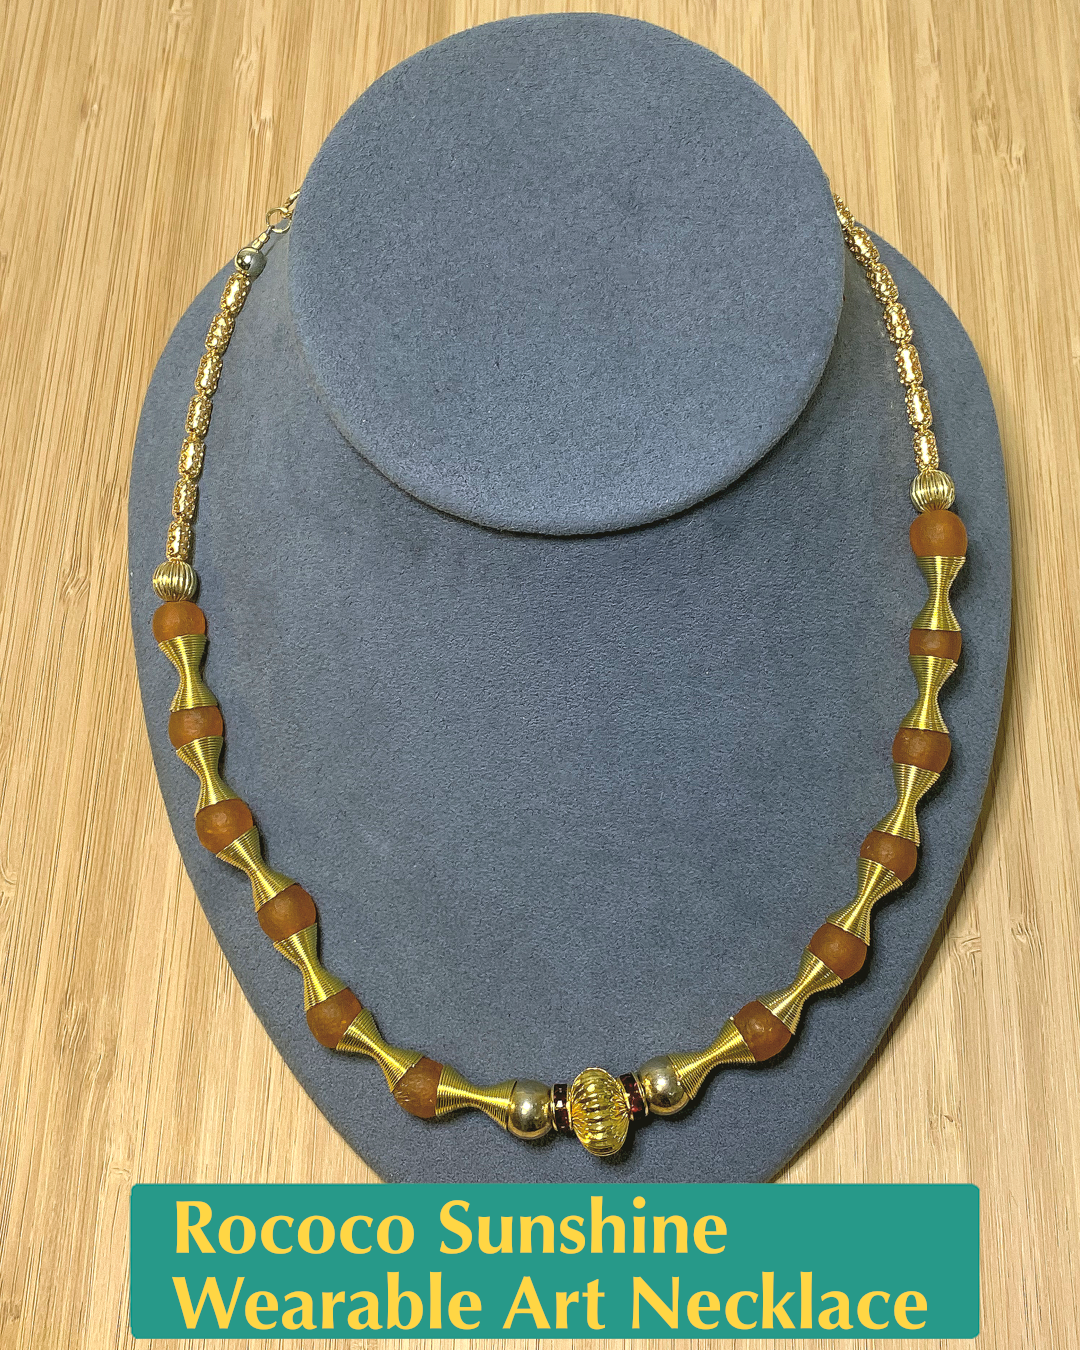 Handmade, wearable art necklace made from orange recycled glass and gold beads of different shapes and textures